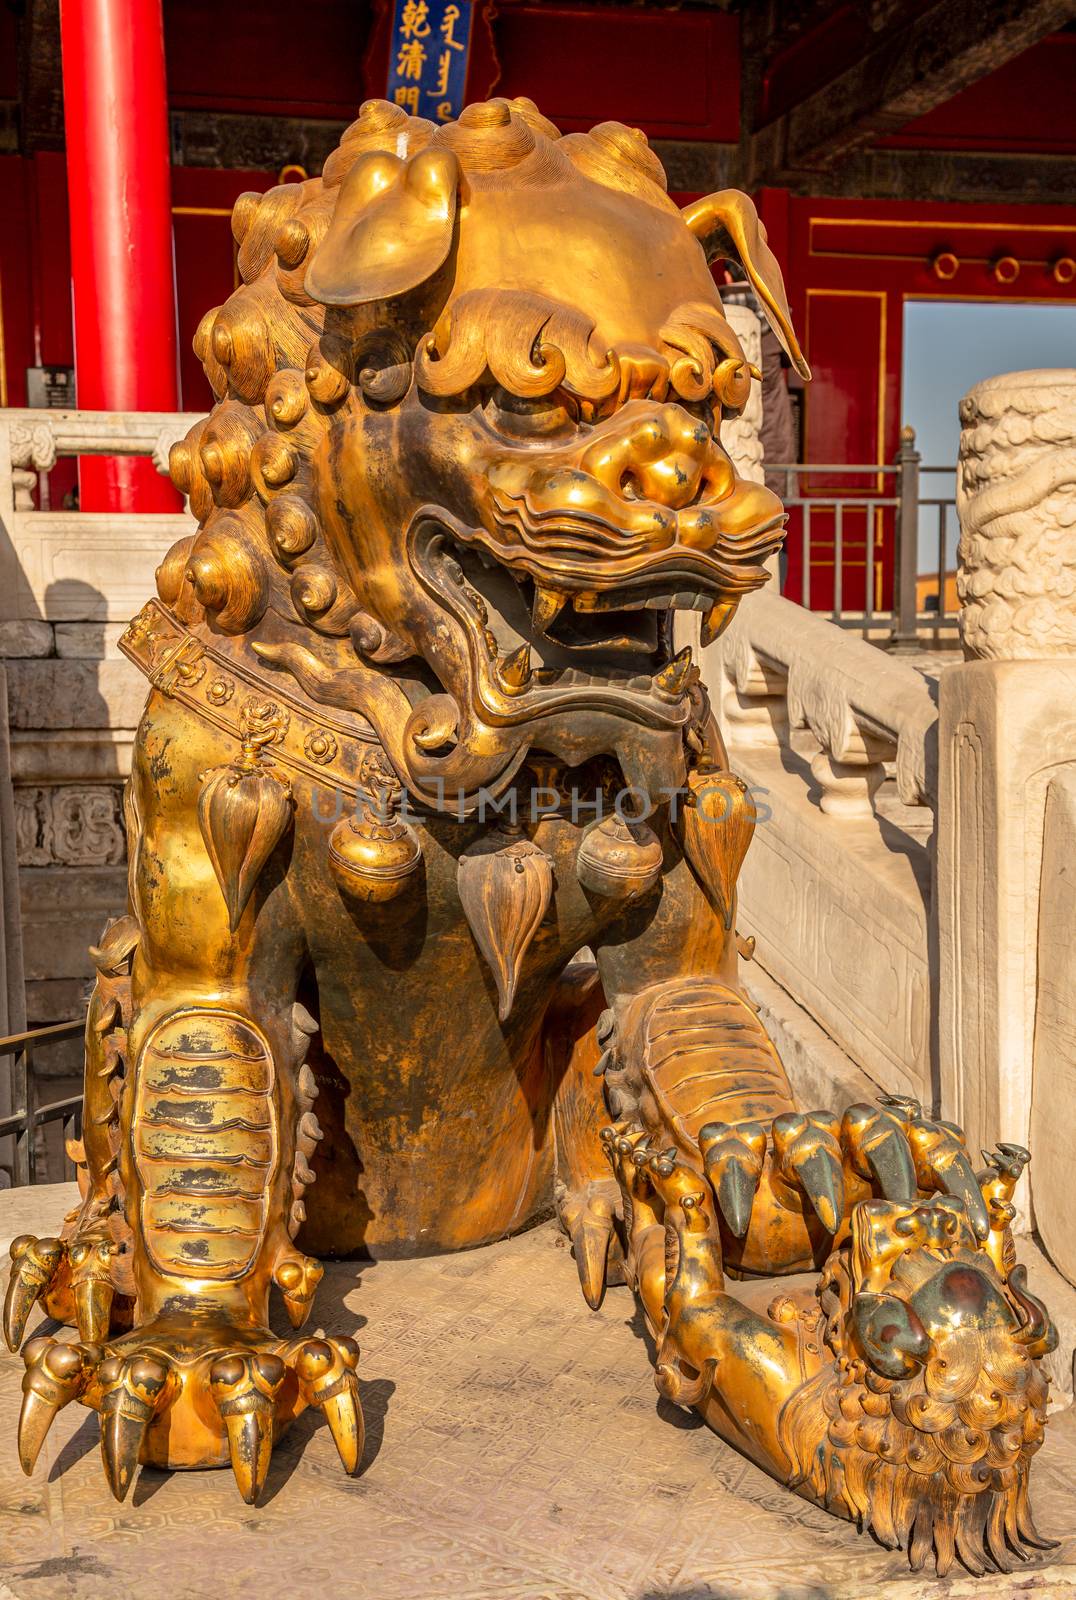 Golden chinese guardian lion or shishi statue from Ming dynasty era, at the entrance to the palace in the Forbidden City, Beijing, China